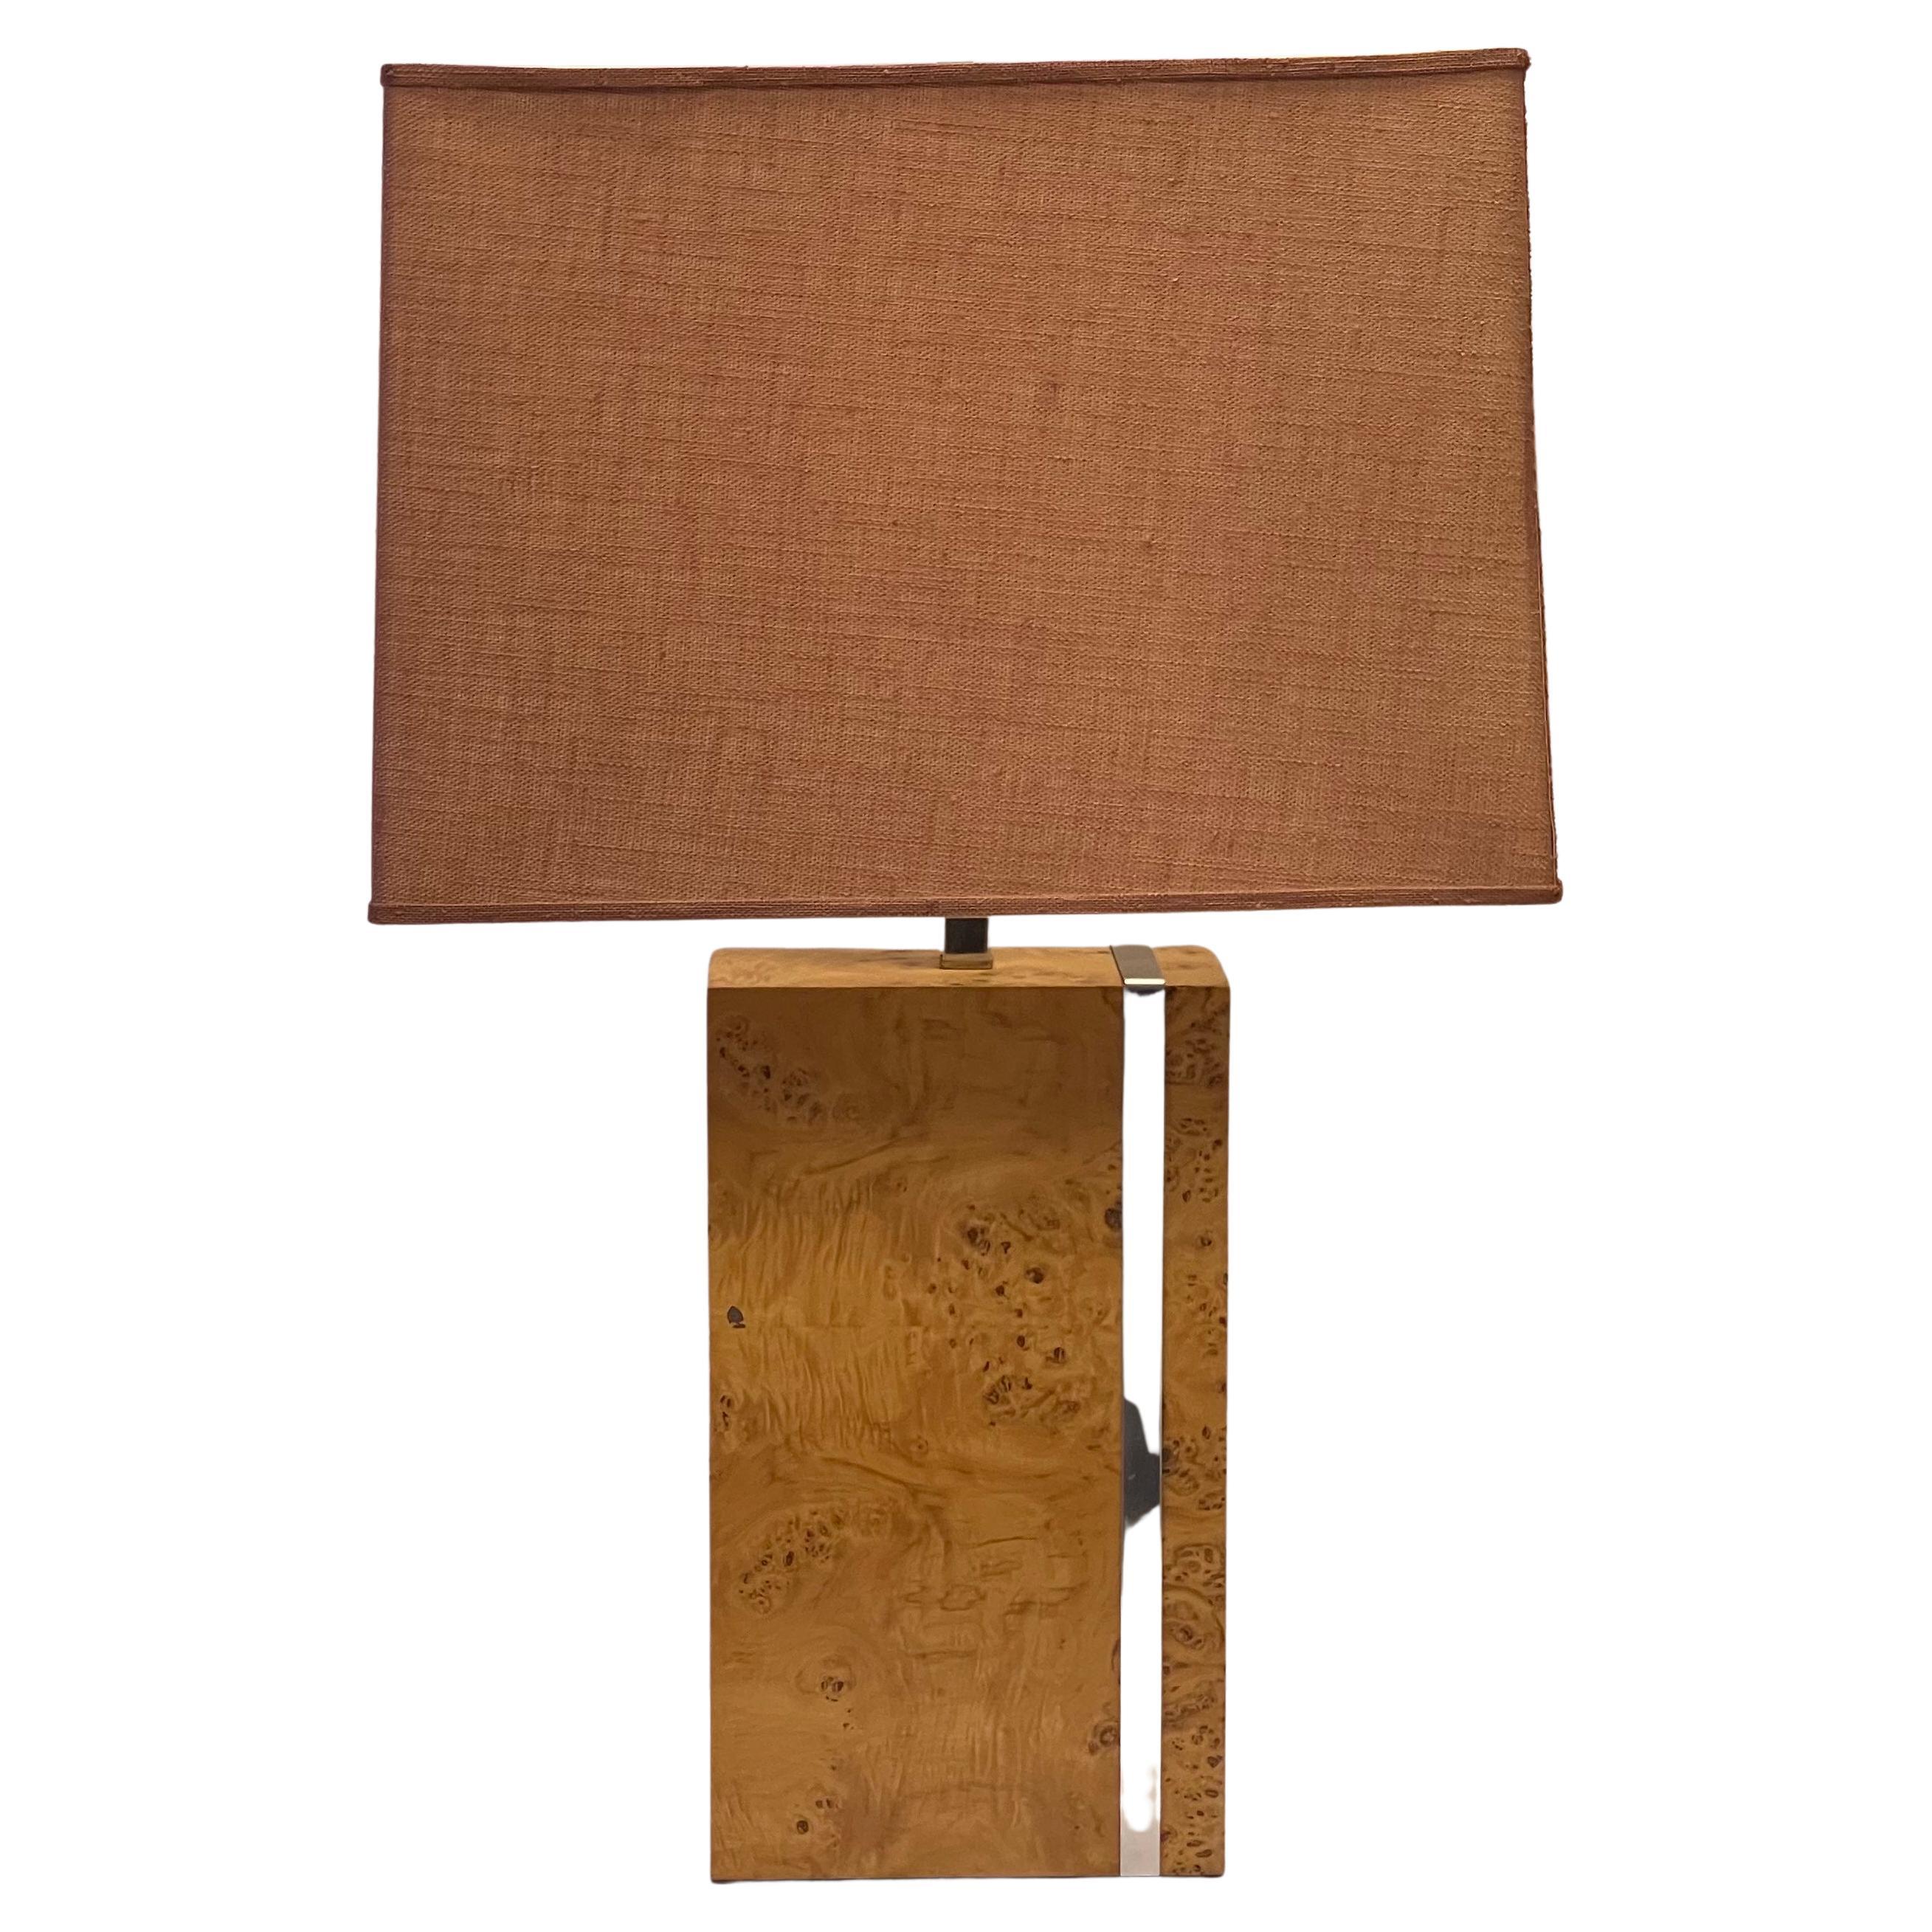 This is a good looking lamp! It is a modern Milo Baughman style burl table lamp. It is unmarked and in very good condition. The shade is as well.